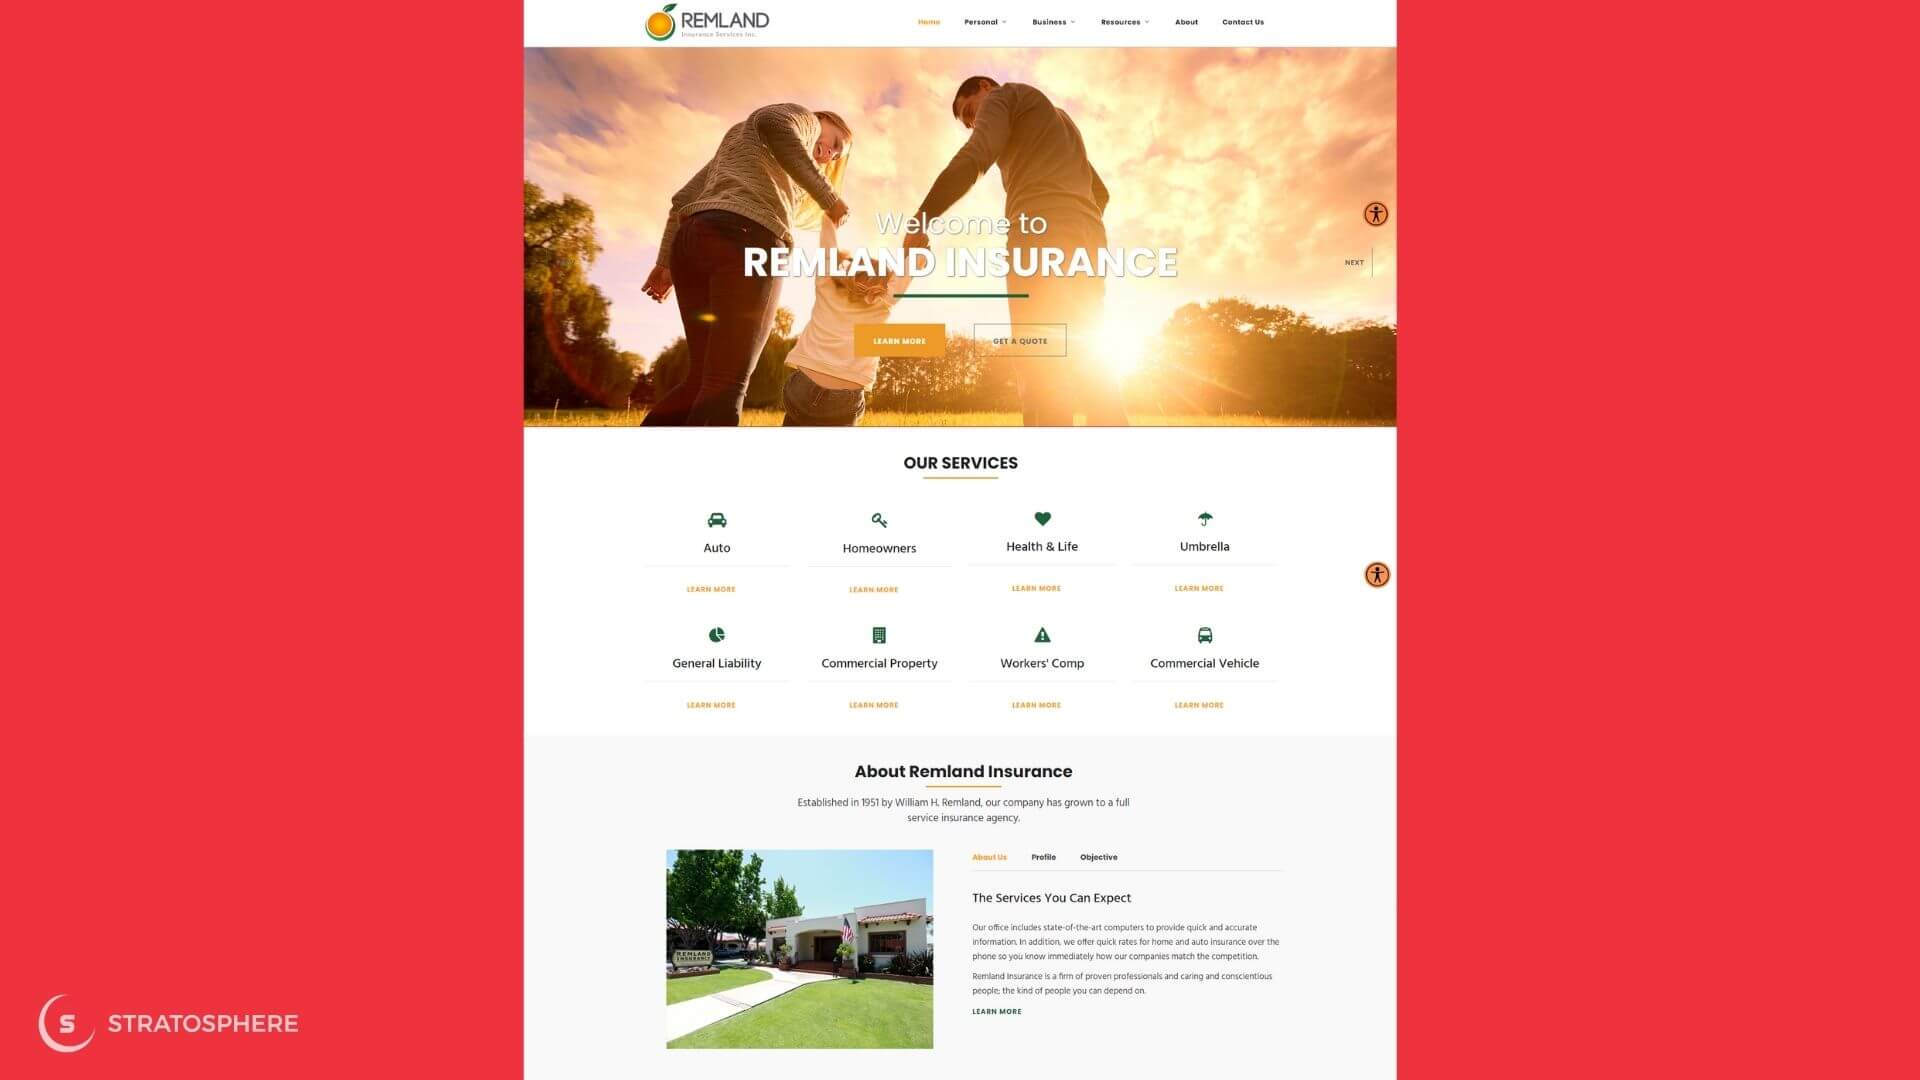 Remland Insurance Website Design Showing Tri-Color Theme Consistency in Design